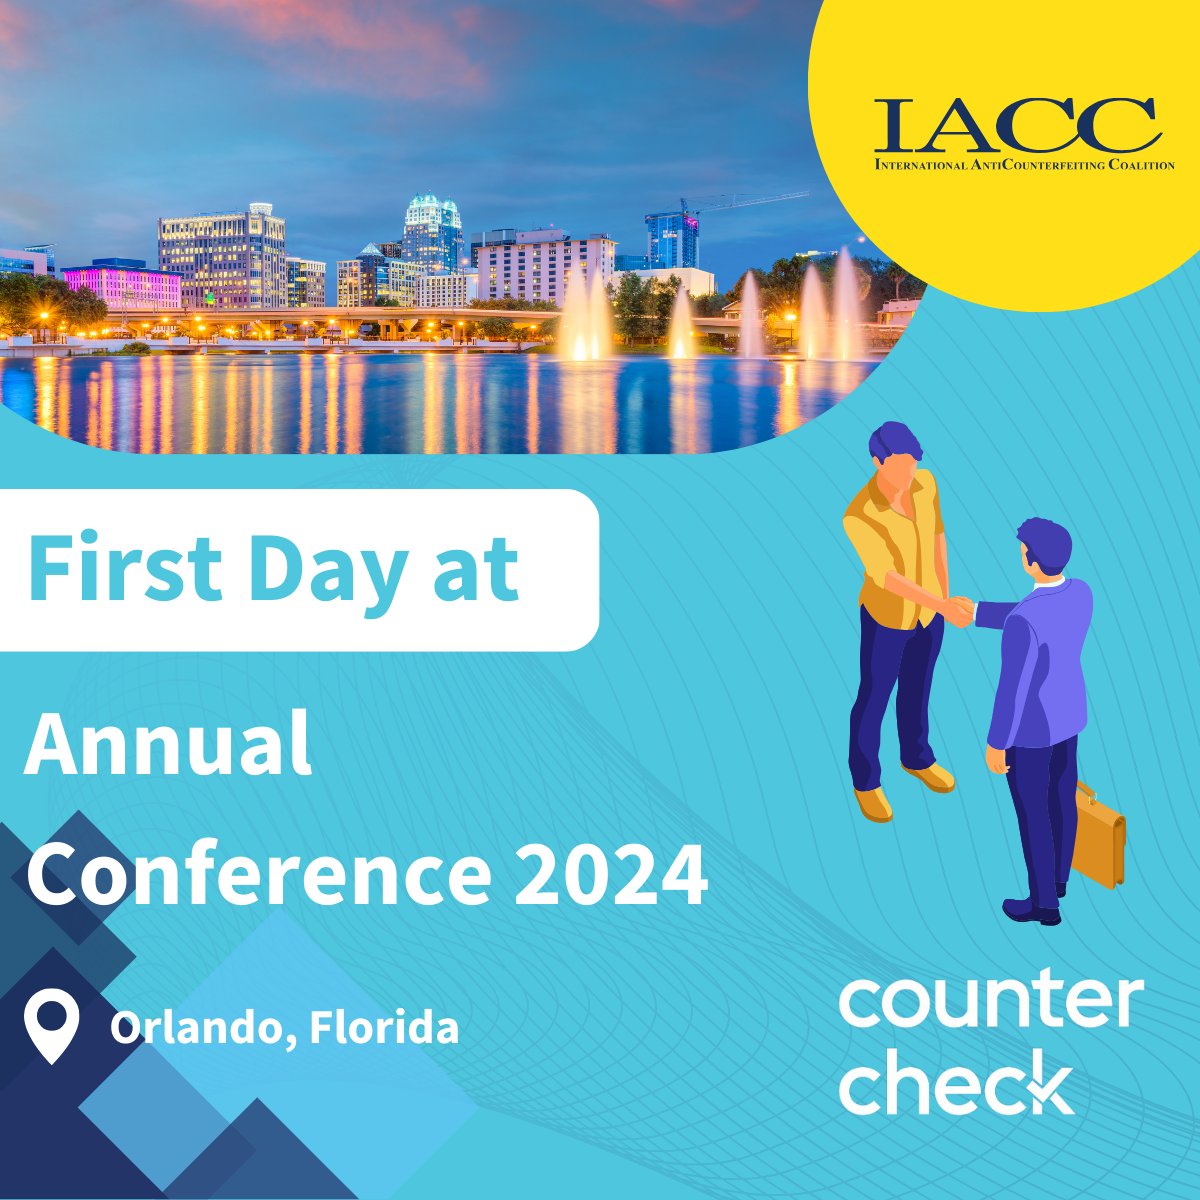 We are in Orlando📍for the 1st day at the @IACC_GetReal Annual Conference 2024!

Proud to be present as exhibitors🌟 at the forefront of our innovative #technology.

Looking forward to connecting with industry leaders, sharing insights, & working together.

#IACCAnnualConference